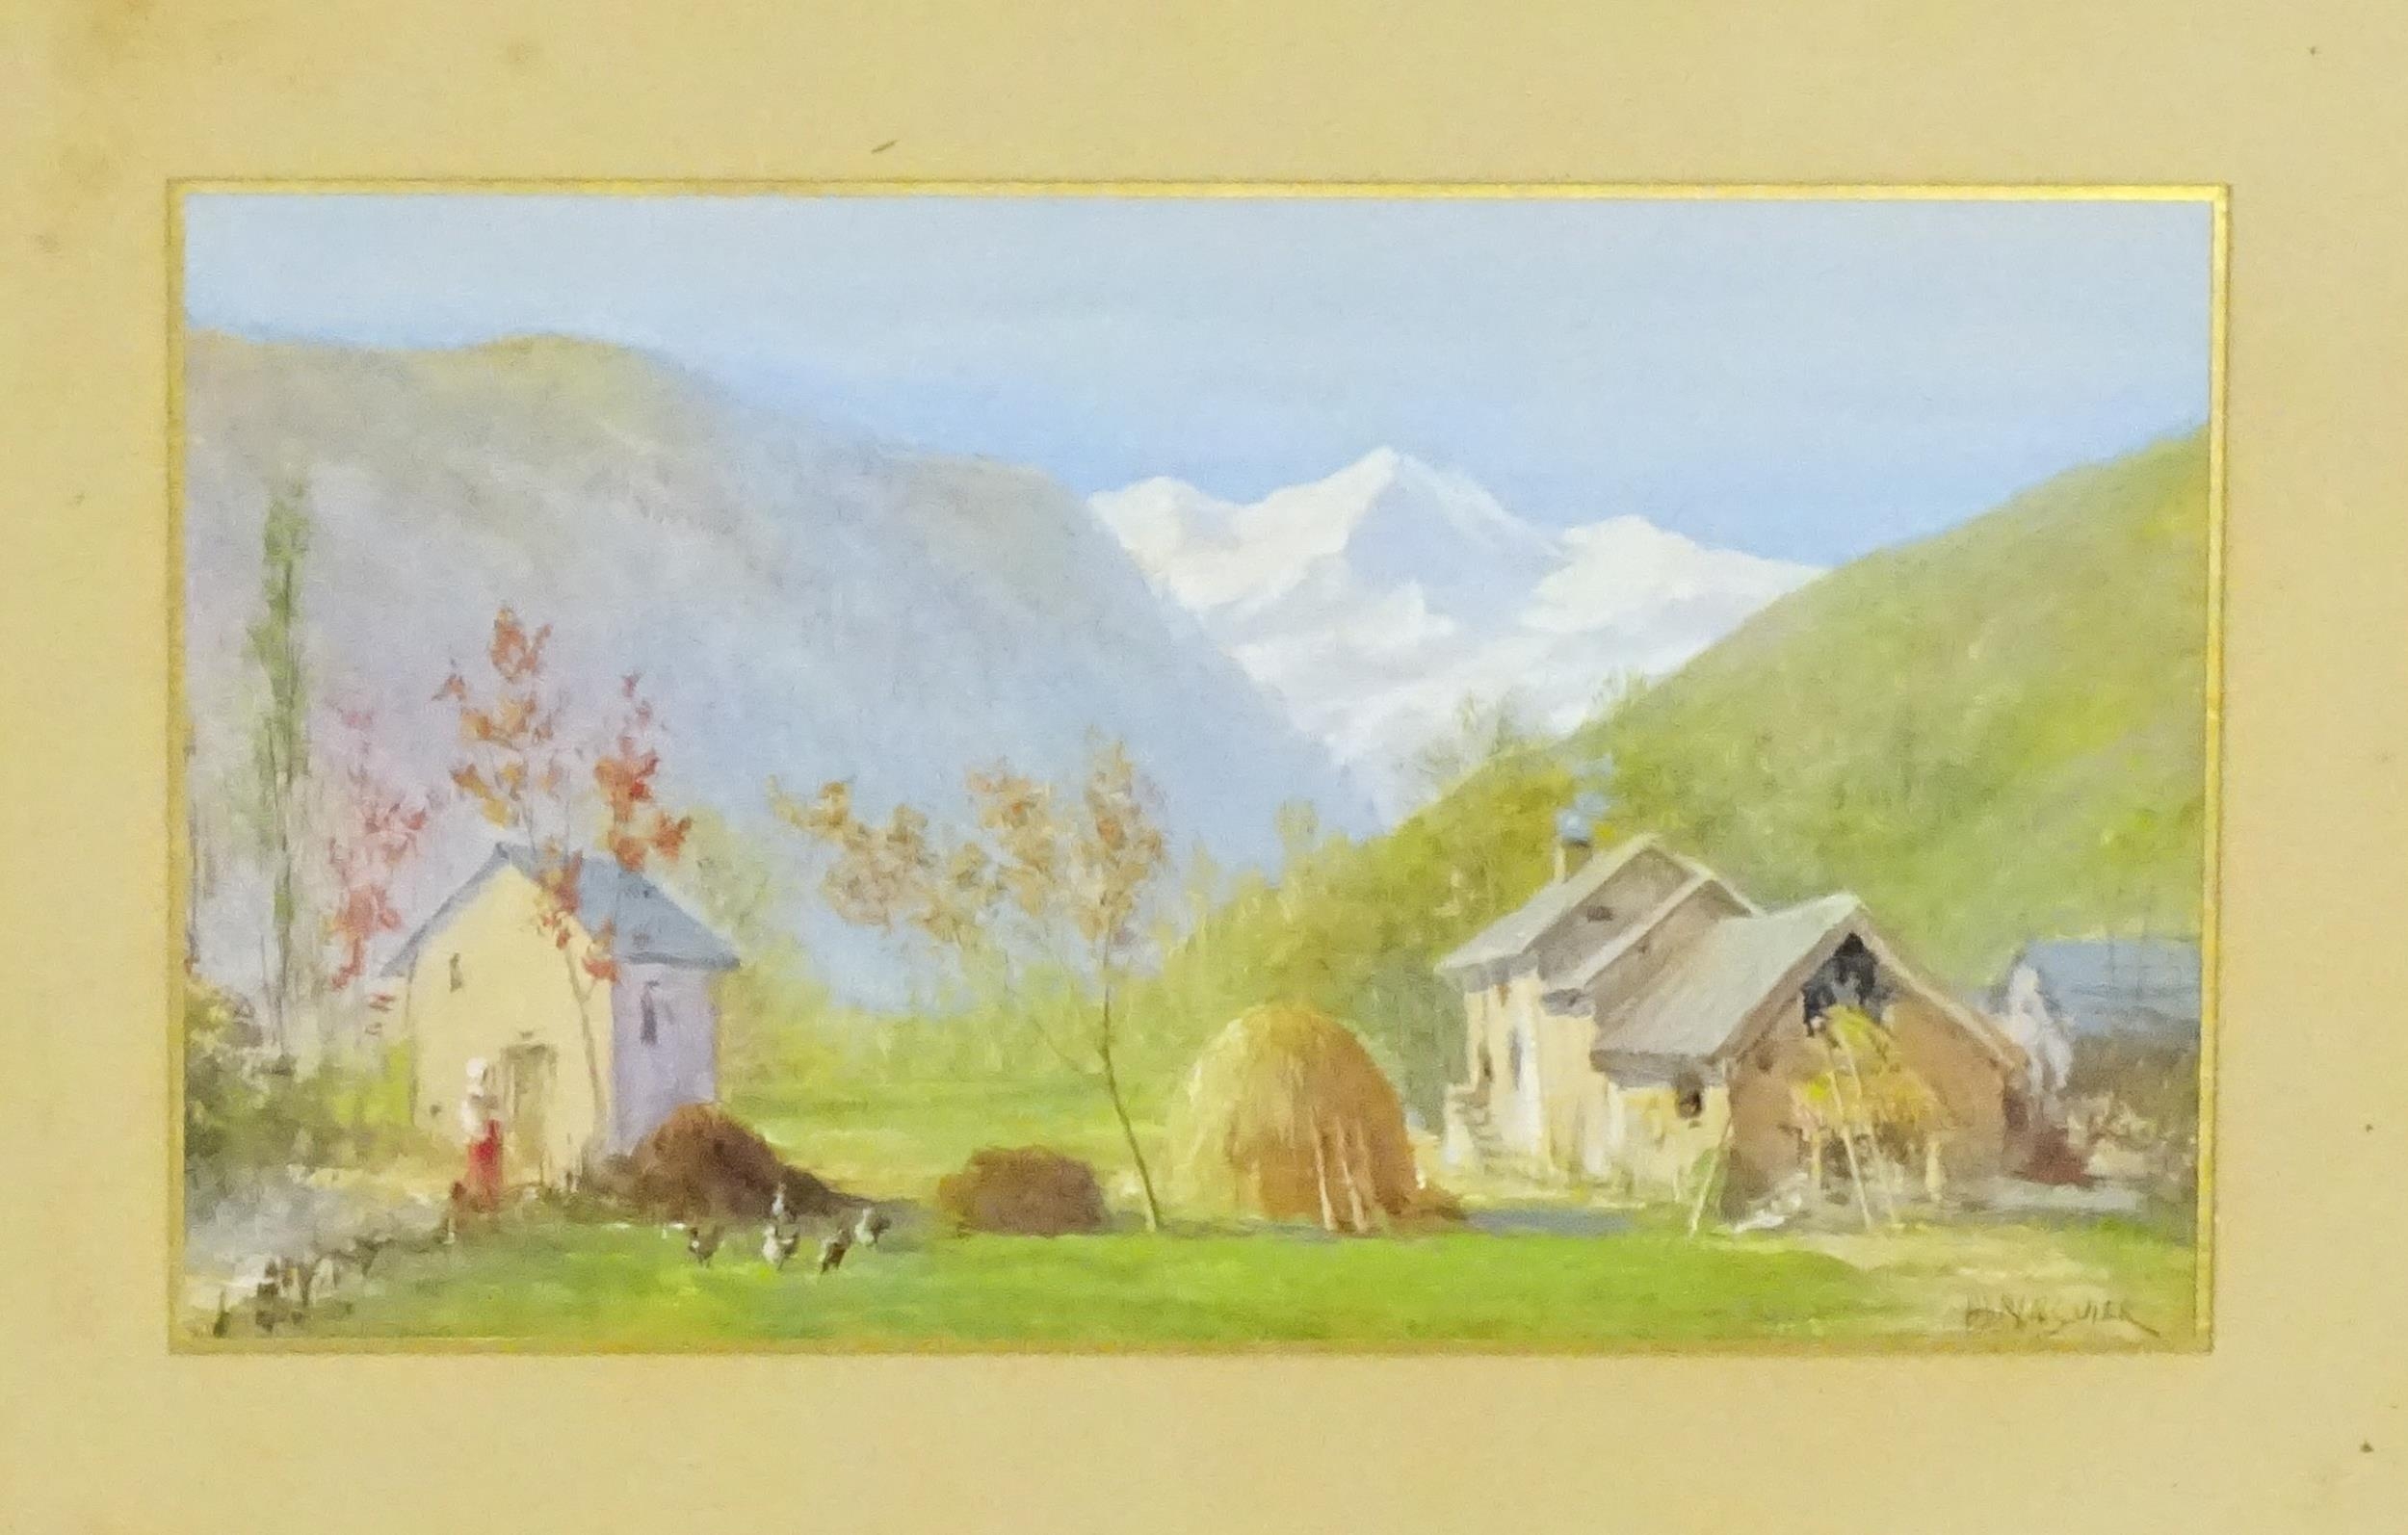 Bringuier, Early 20th century, Watercolour, A Swiss farm scene with figures, chickens and hay stook, - Image 3 of 4